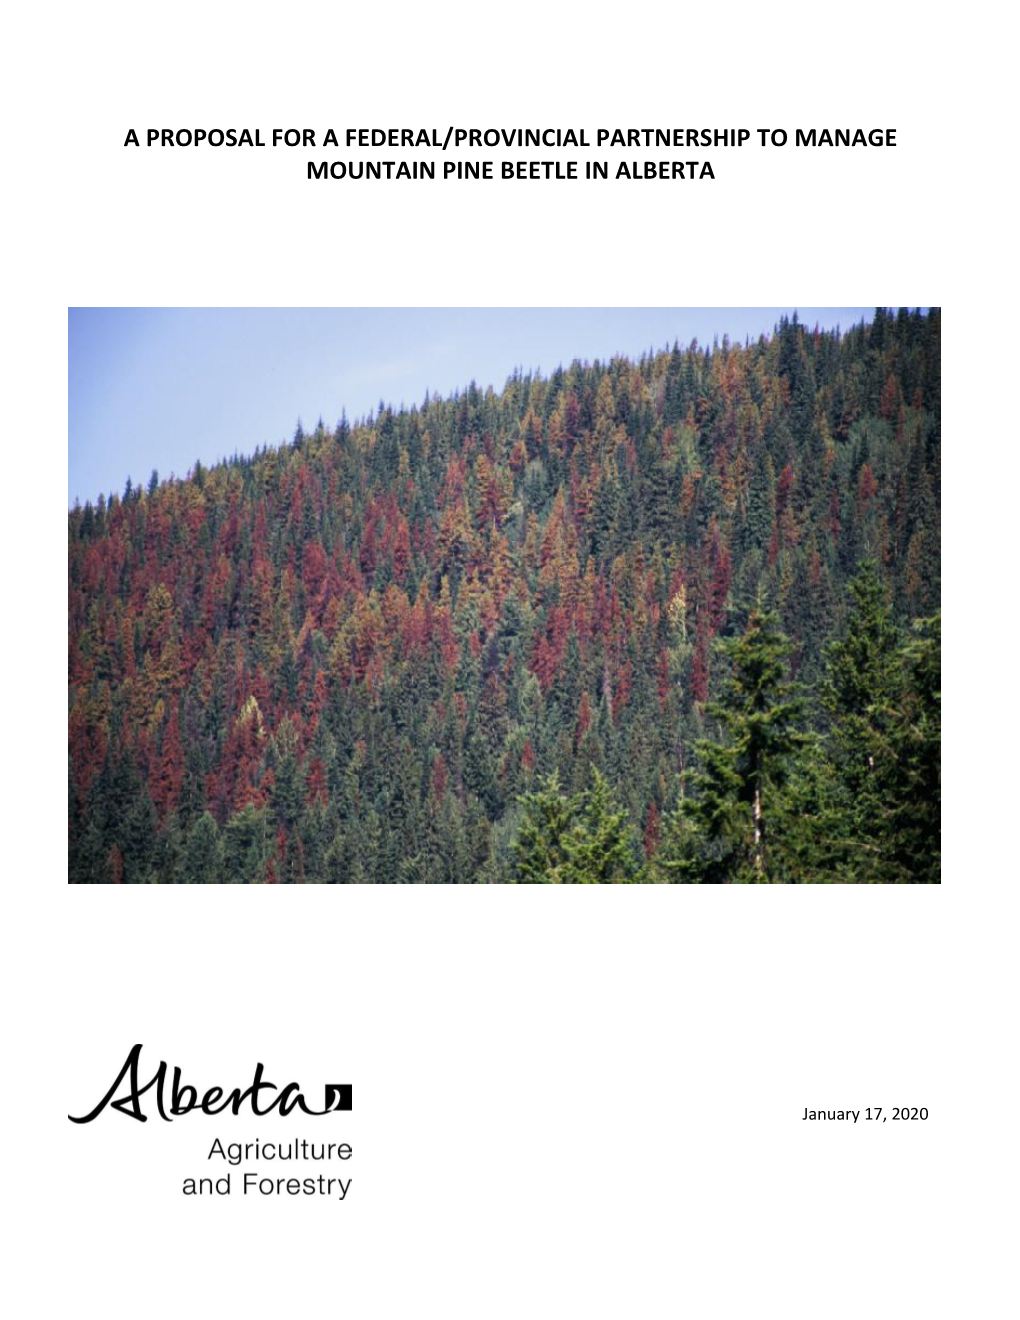 A Proposal for a Federal/Provincial Partnership to Manage Mountain Pine Beetle in Alberta